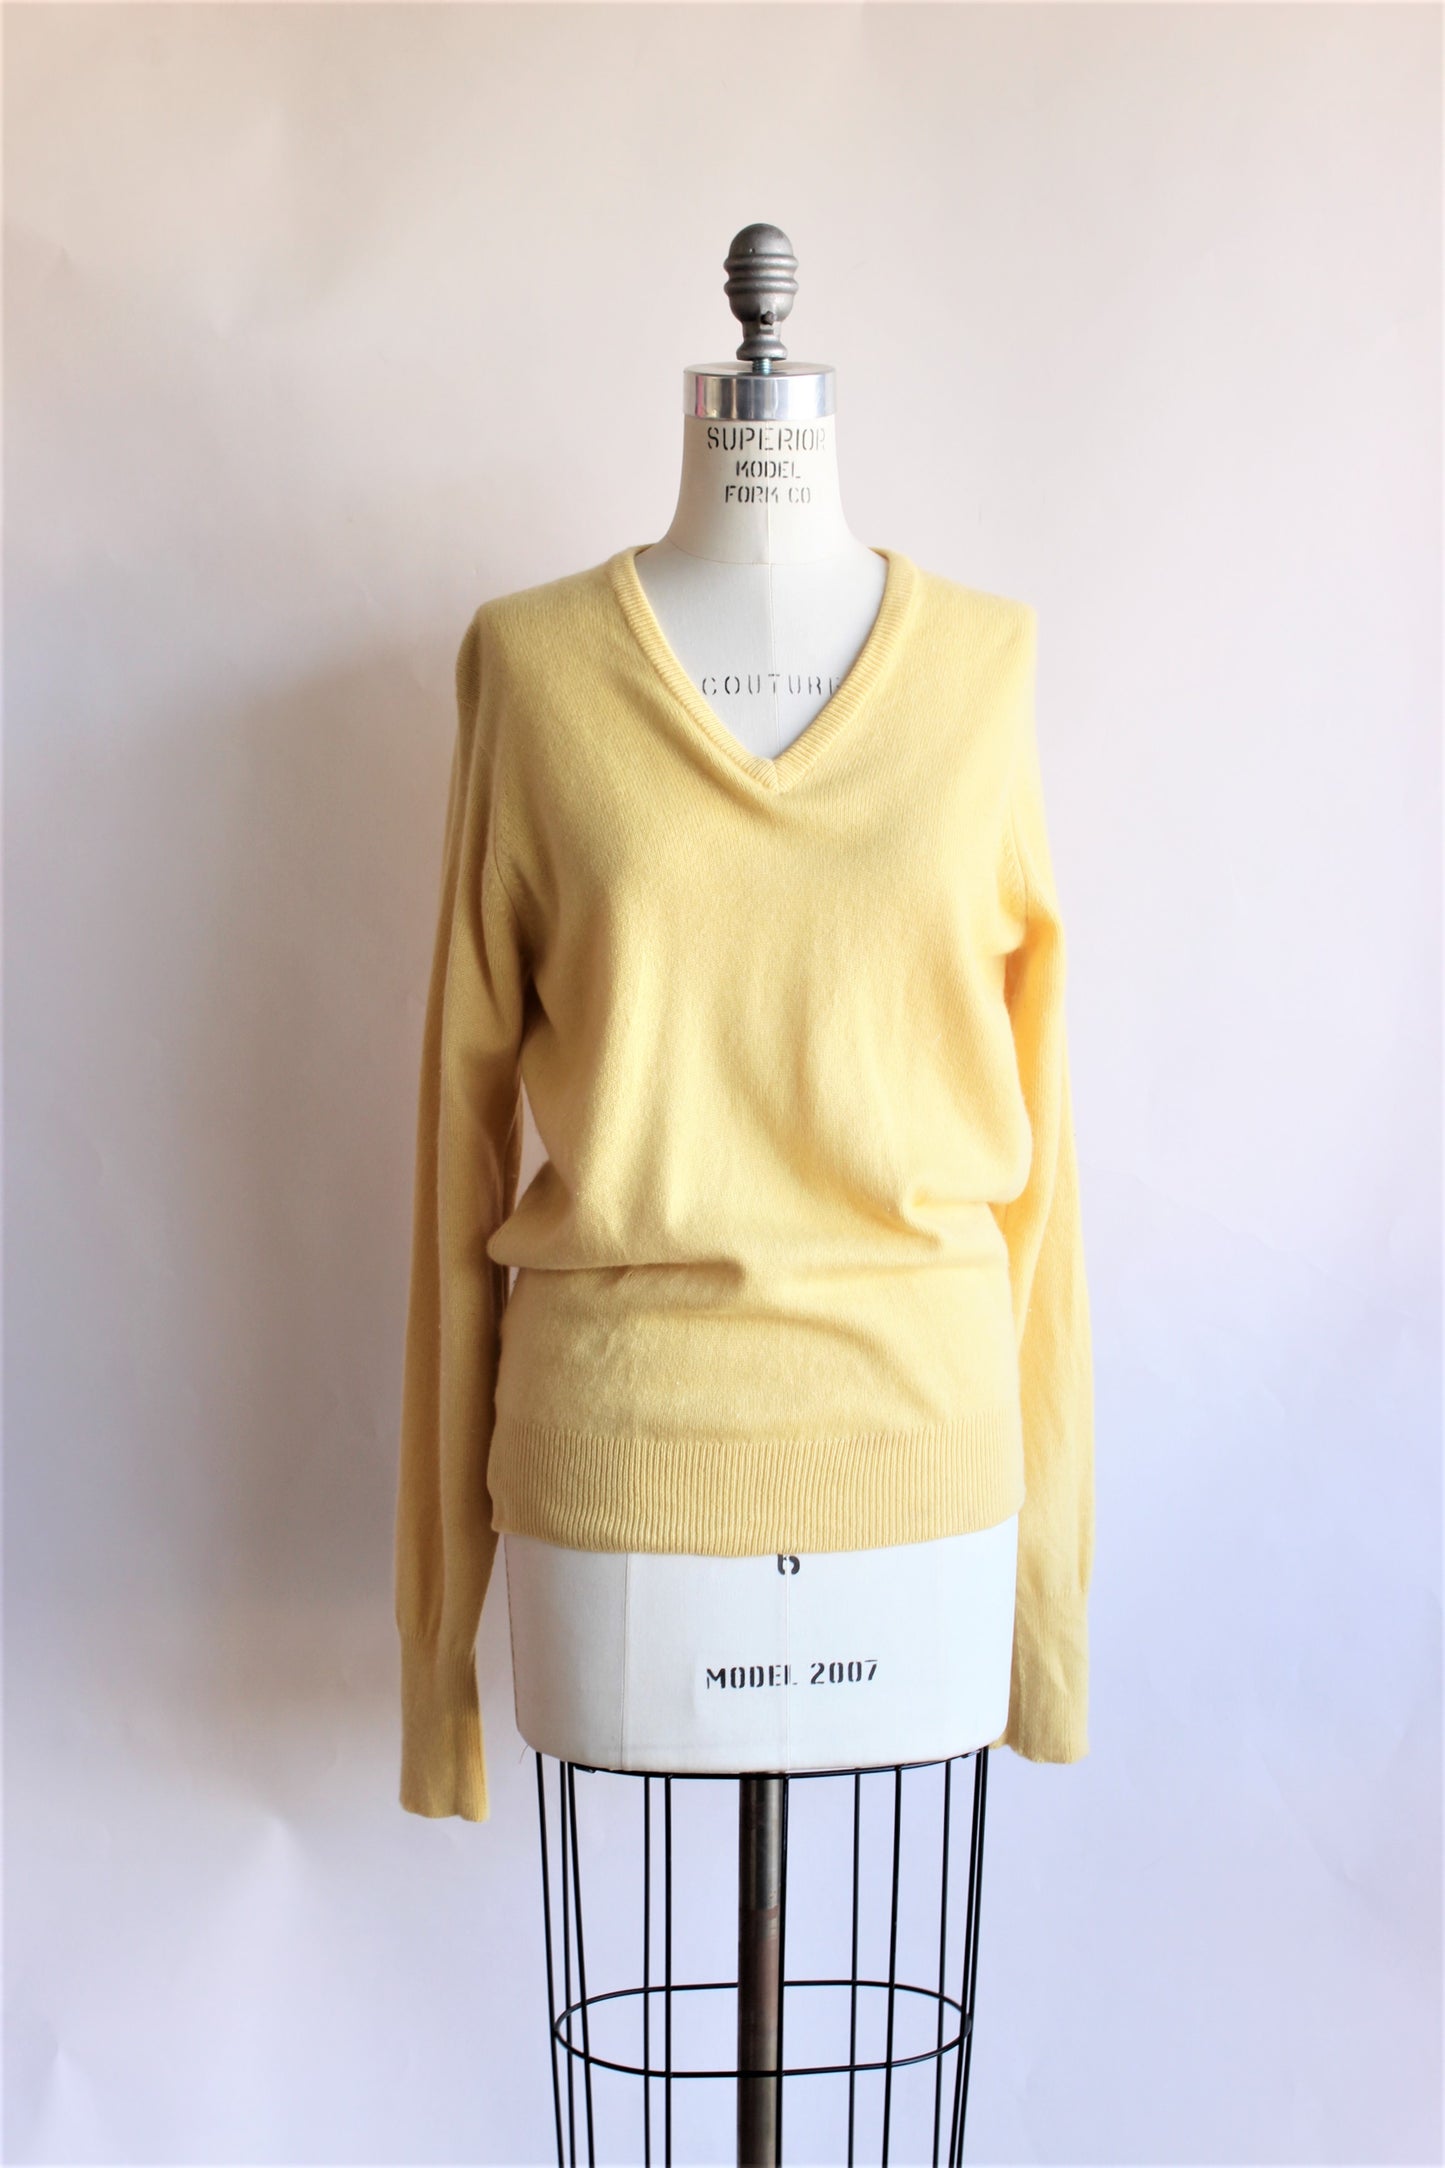 Vintage 1960s Yellow Cashmere Sweater by Ballantyne